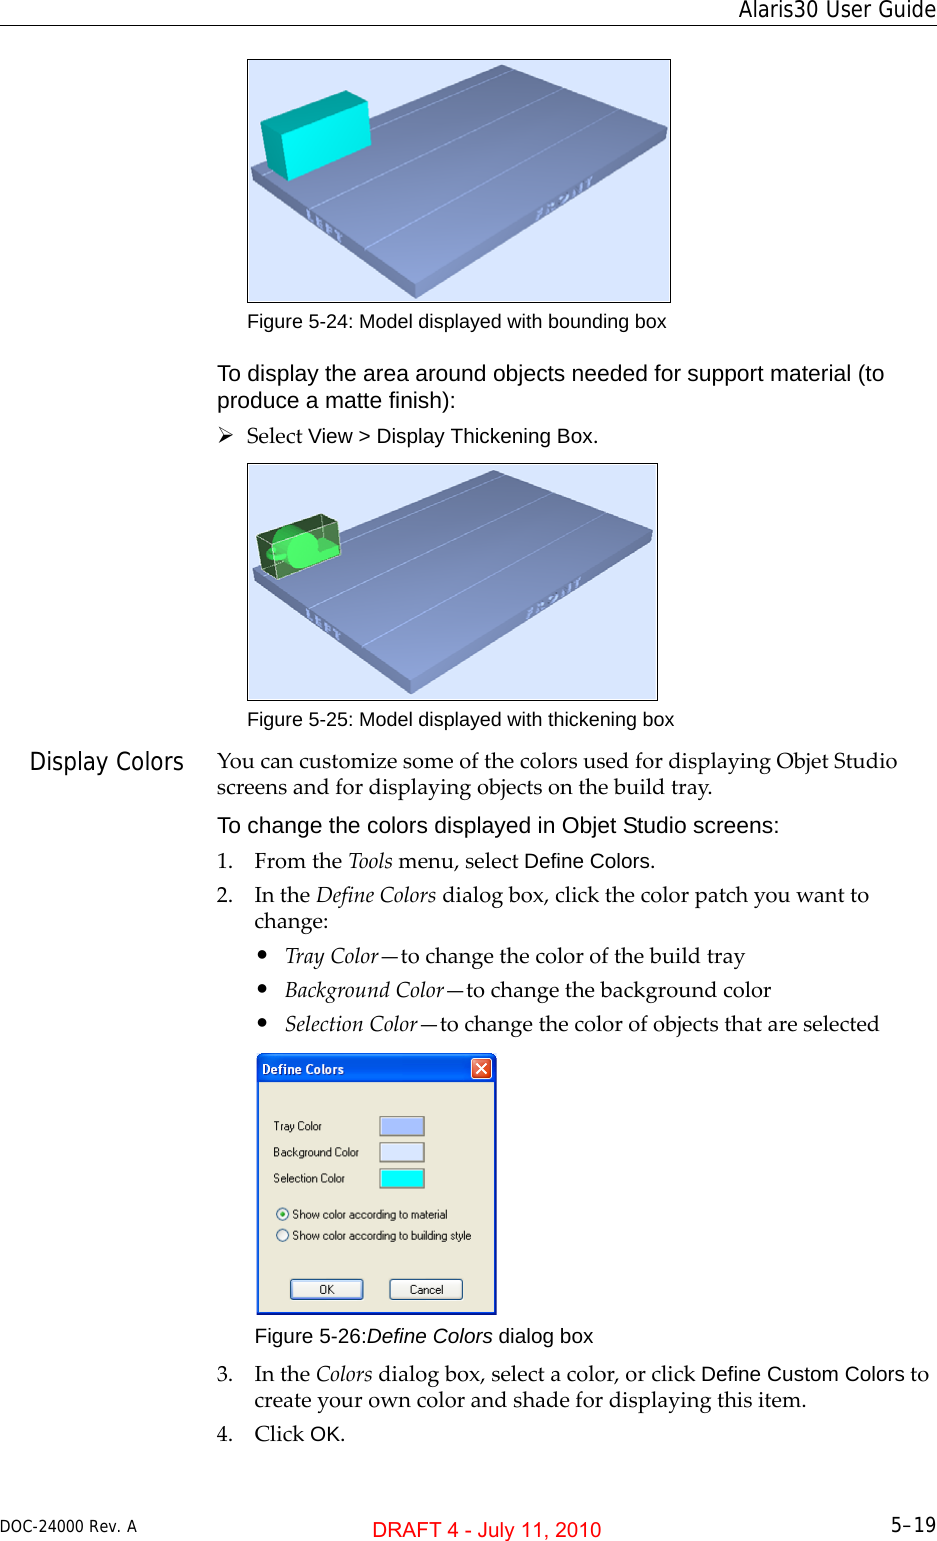 DOC-24000 Rev. A 5–19Alaris30 User GuideFigure 5-24: Model displayed with bounding boxTo display the area around objects needed for support material (to produce a matte finish):¾SelectView &gt; Display Thickening Box.Figure 5-25: Model displayed with thickening boxDisplay Colors YoucancustomizesomeofthecolorsusedfordisplayingObjetStudioscreensandfordisplayingobjectsonthebuildtray.To change the colors displayed in Objet Studio screens:1. FromtheToolsmenu,selectDefine Colors.2. IntheDefineColorsdialogbox,clickthecolorpatchyouwanttochange:•TrayColor—tochangethecolorofthebuildtray•BackgroundColor—tochangethebackgroundcolor•SelectionColor—tochangethecolorofobjectsthatareselectedFigure 5-26:Define Colors dialog box3. IntheColorsdialogbox,selectacolor,orclickDefine Custom Colorstocreateyourowncolorandshadefordisplayingthisitem.4. ClickOK.DRAFT 4 - July 11, 2010